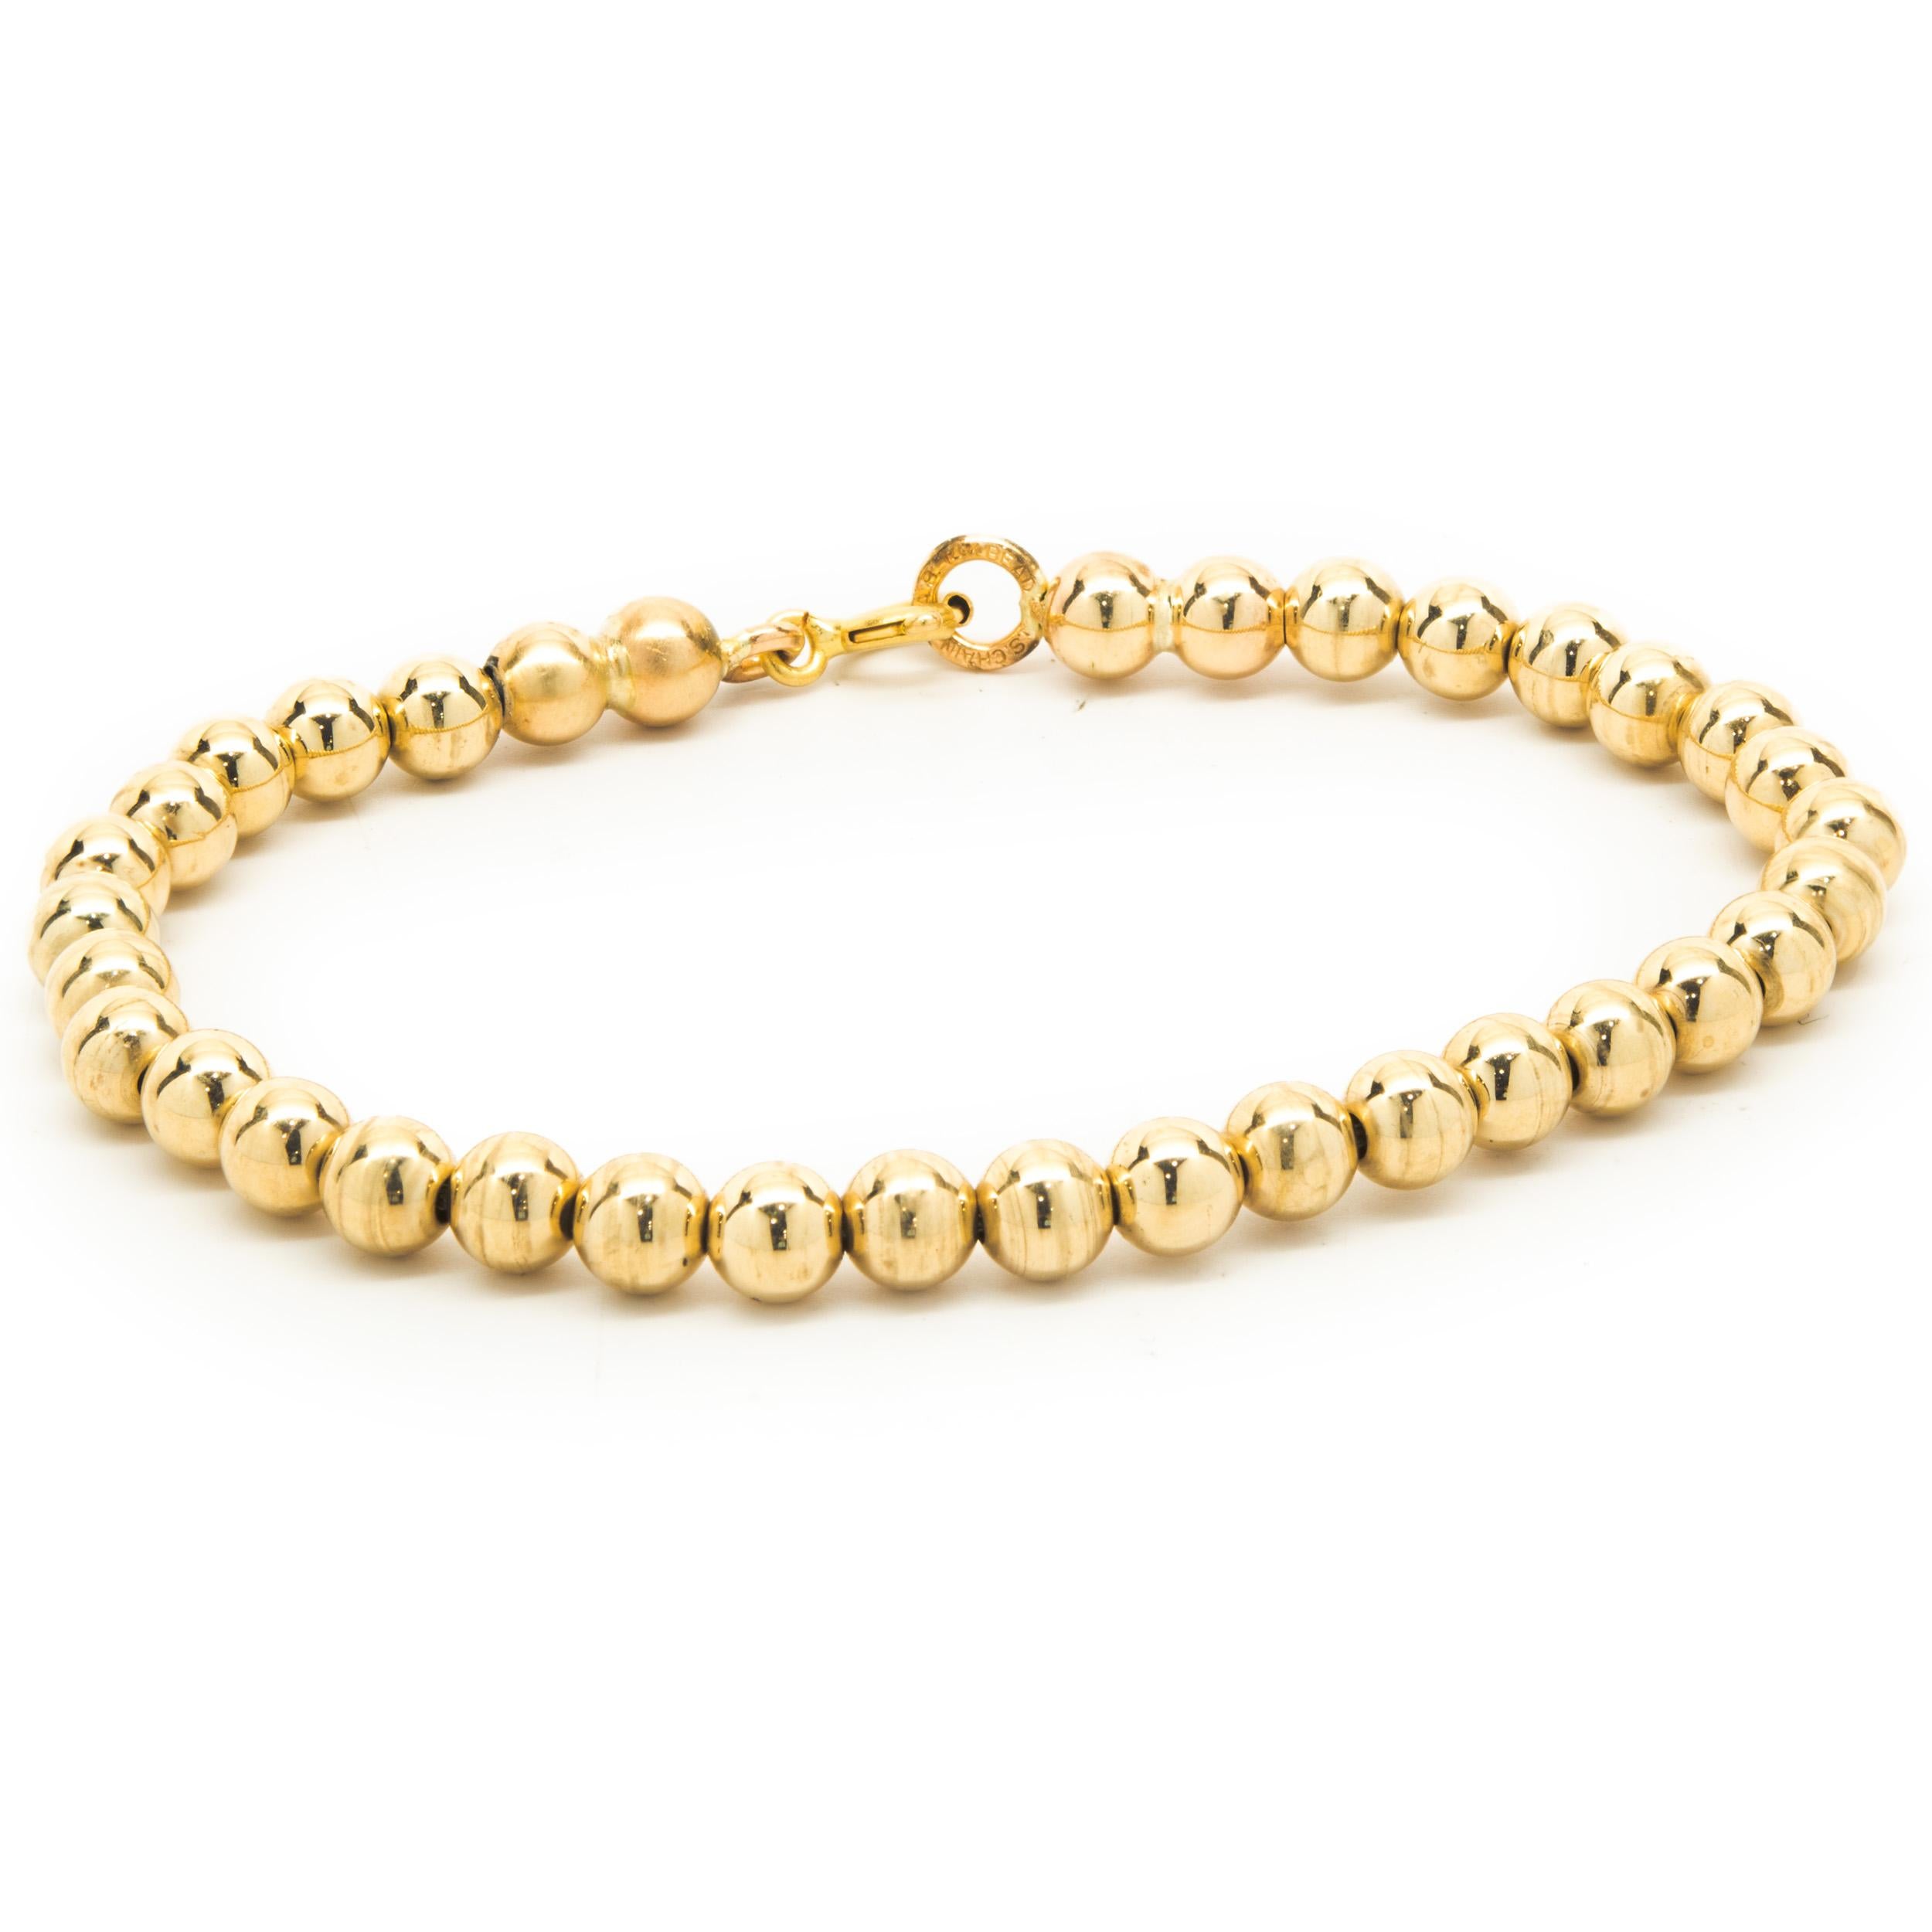 14 Karat Yellow Gold Ball Bracelet In Excellent Condition For Sale In Scottsdale, AZ